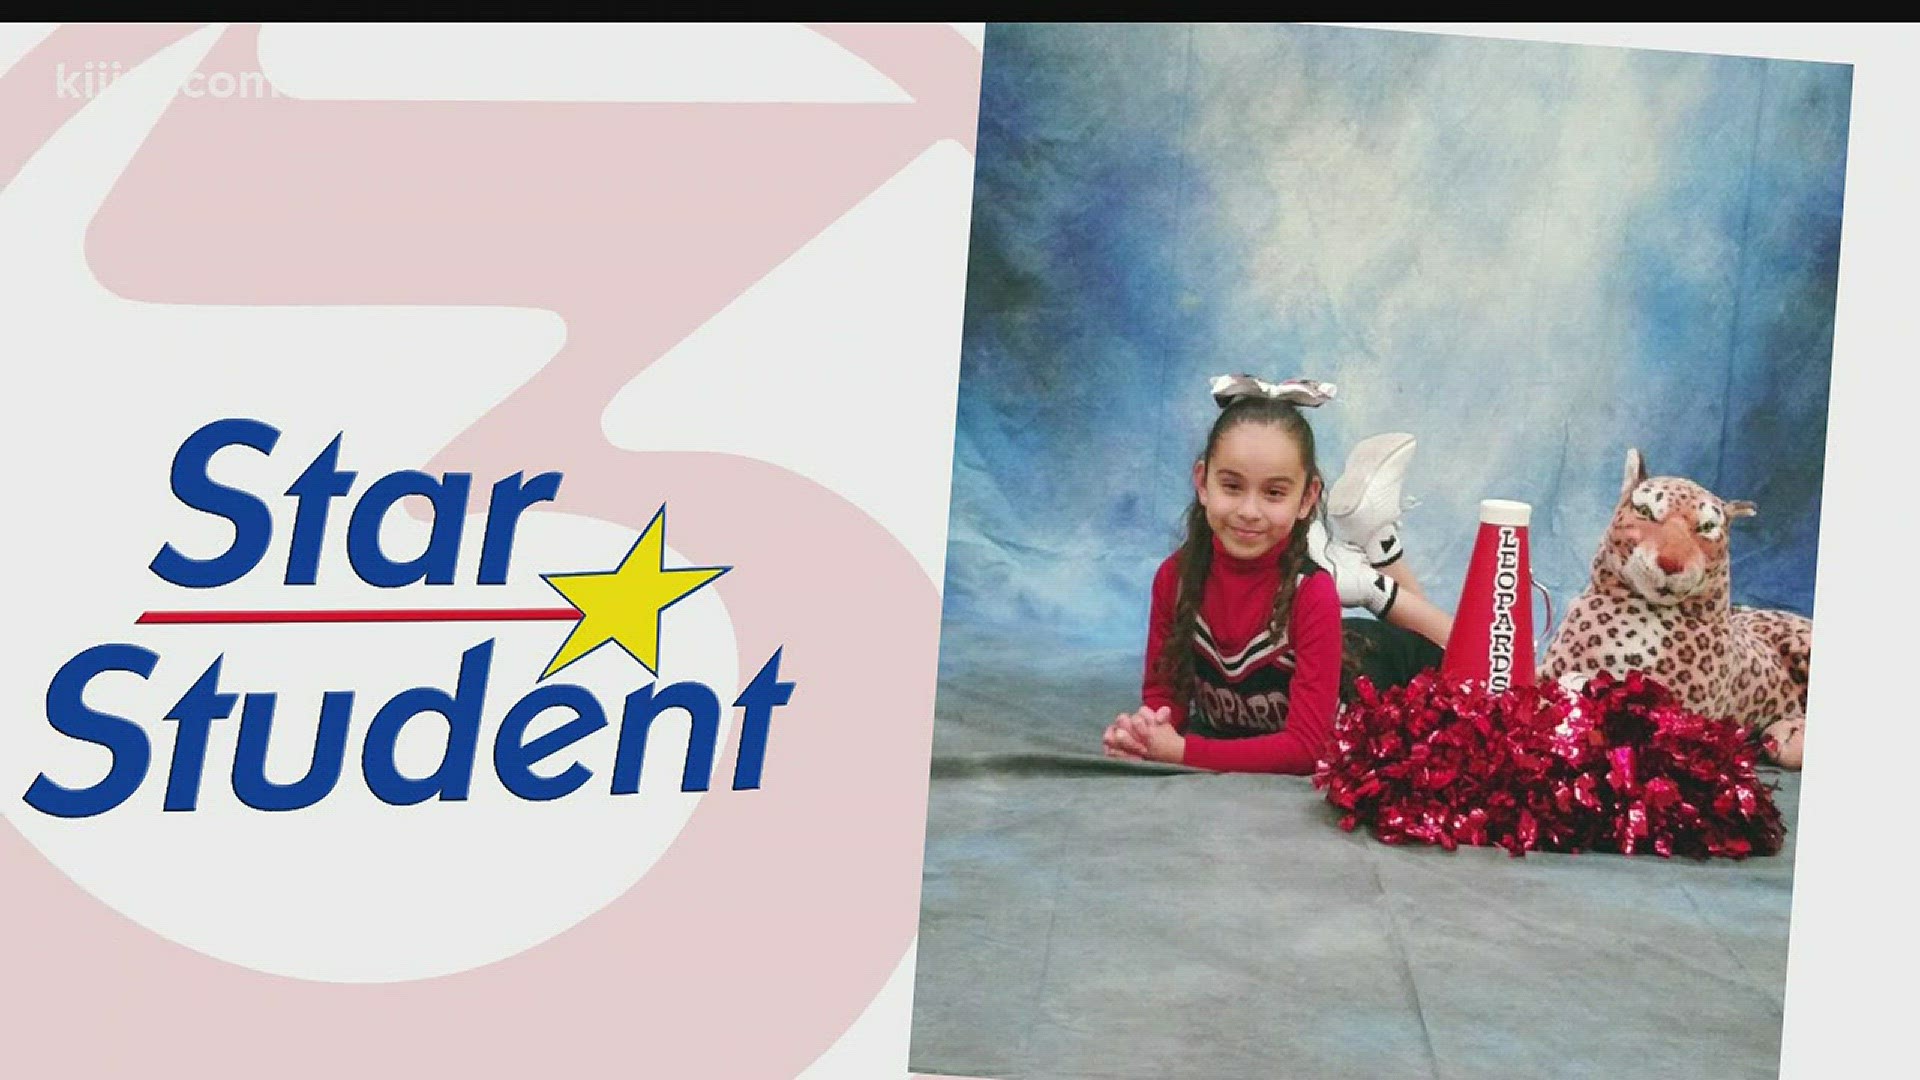 Amaryzza Gallegos is our 3 star student of the week, she is an 8 year-old from Robstown Elementary.